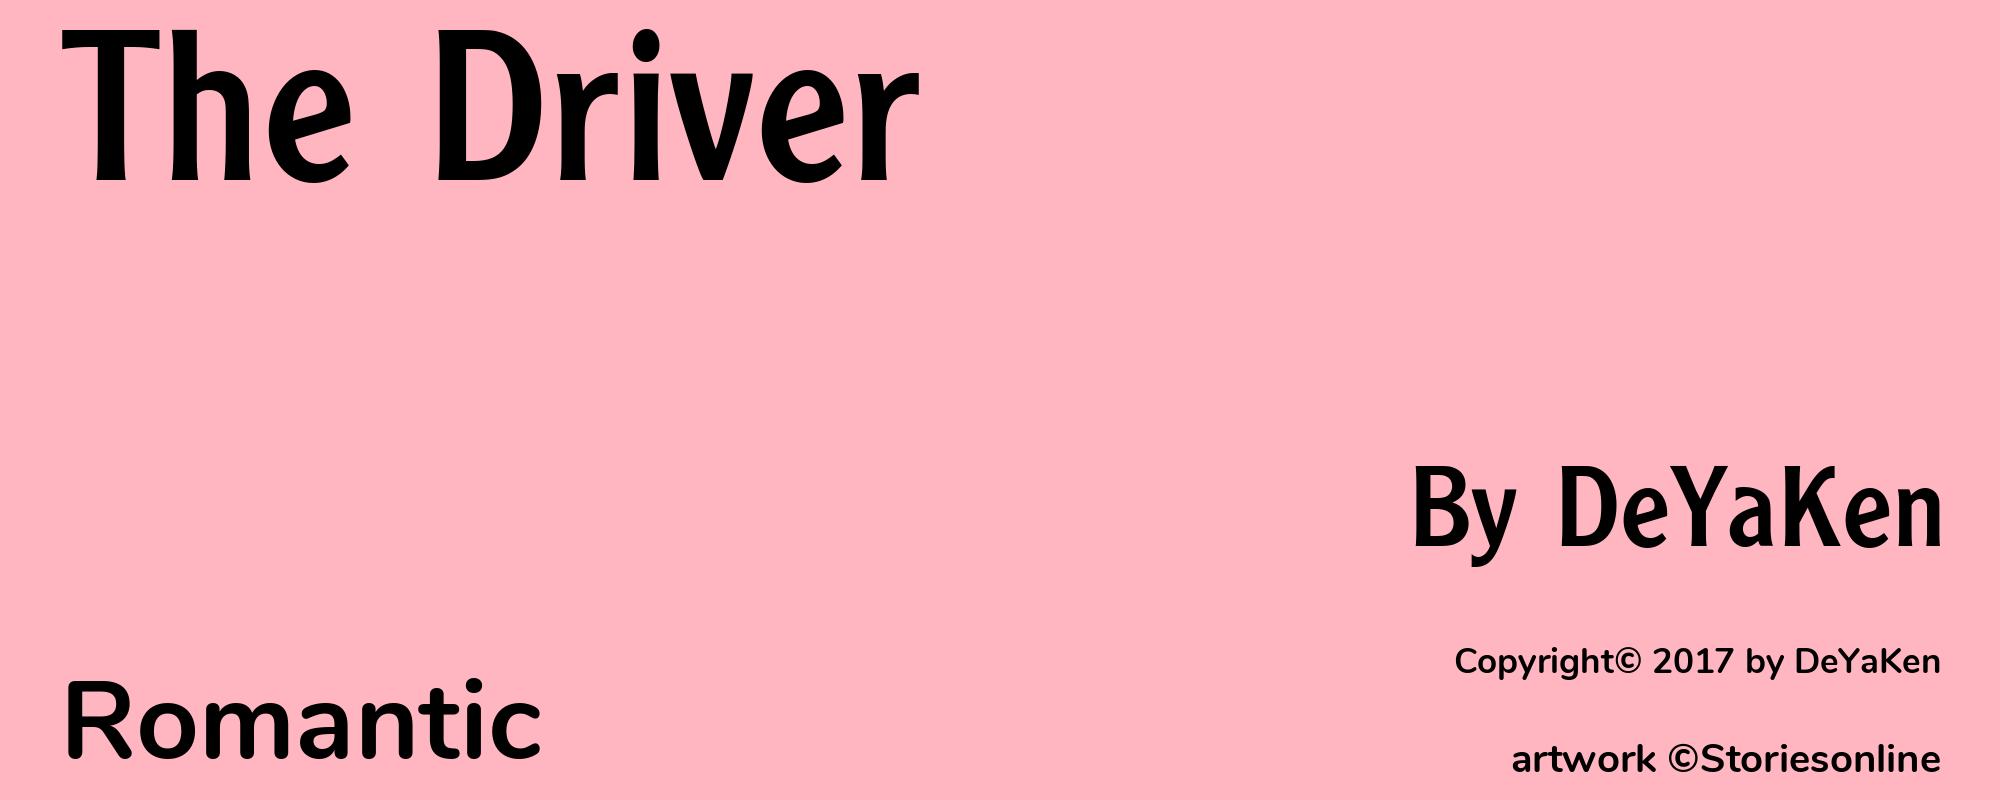 The Driver - Cover